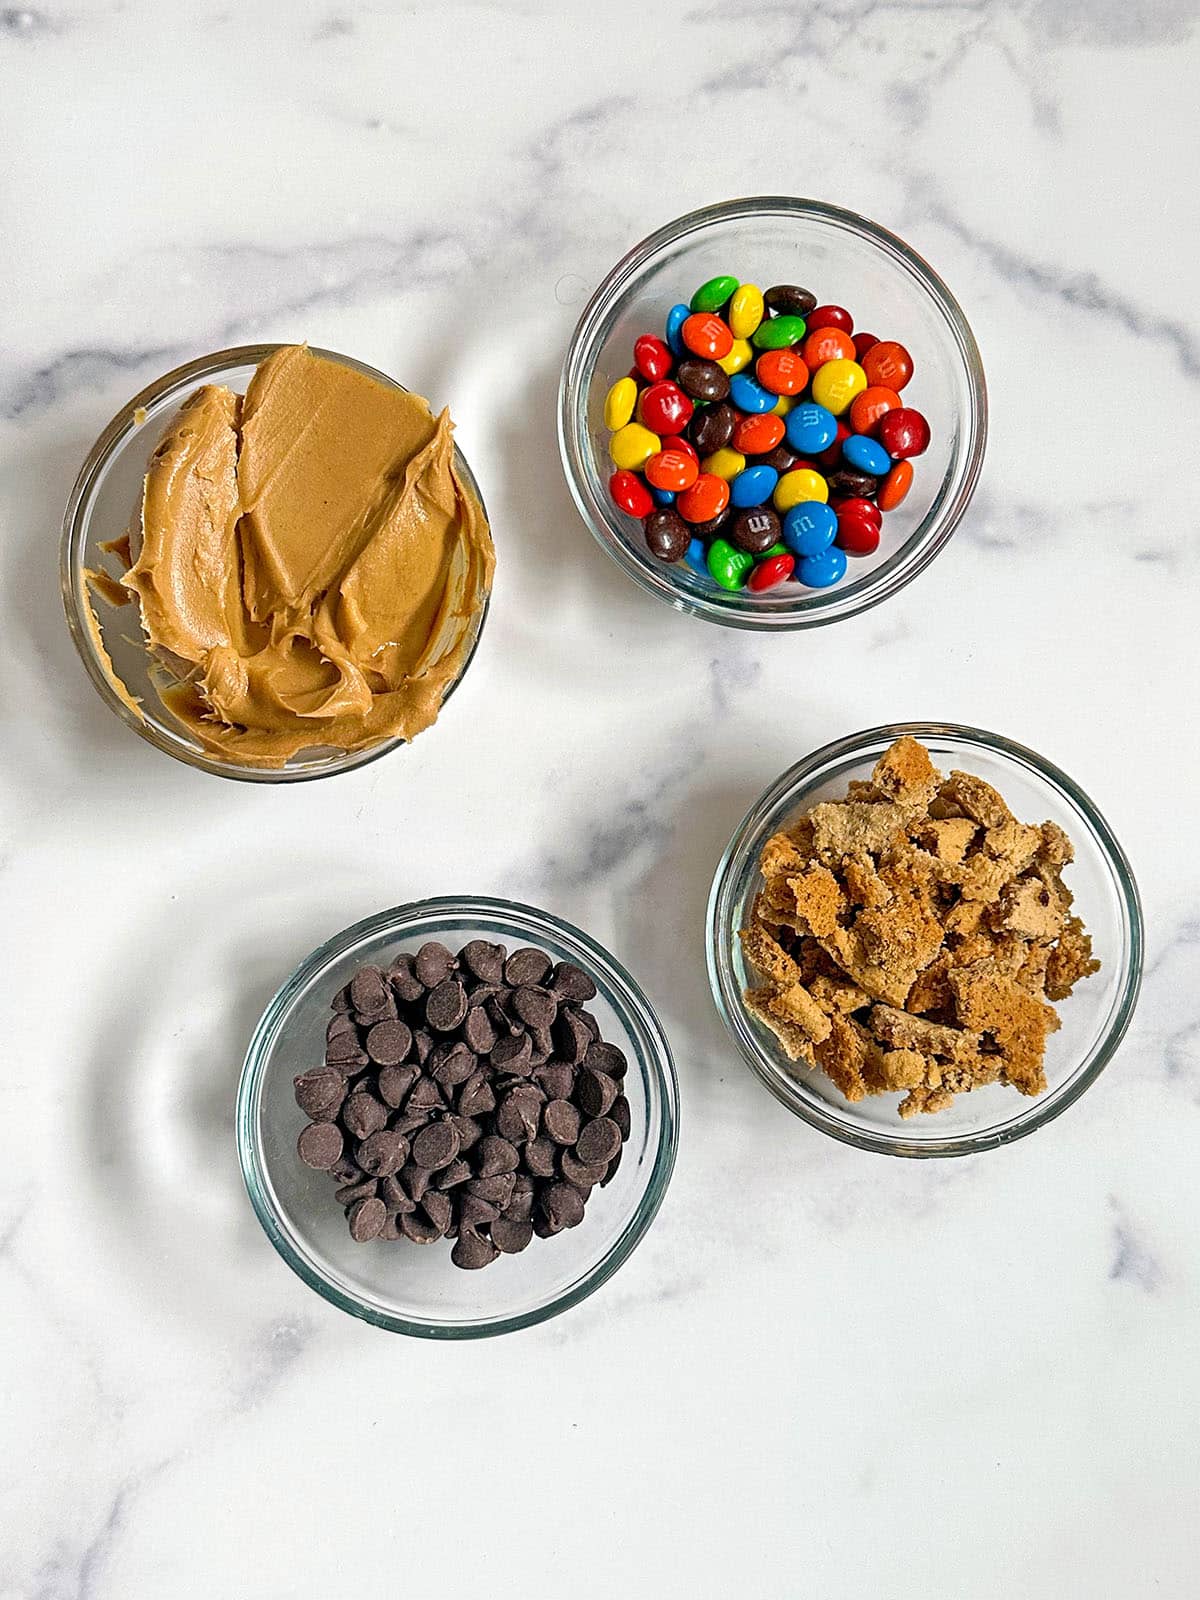 Add-ins for monster cookie ice cream, including peanut butter, M&Ms, chocolate chips, and oatmeal cookies.